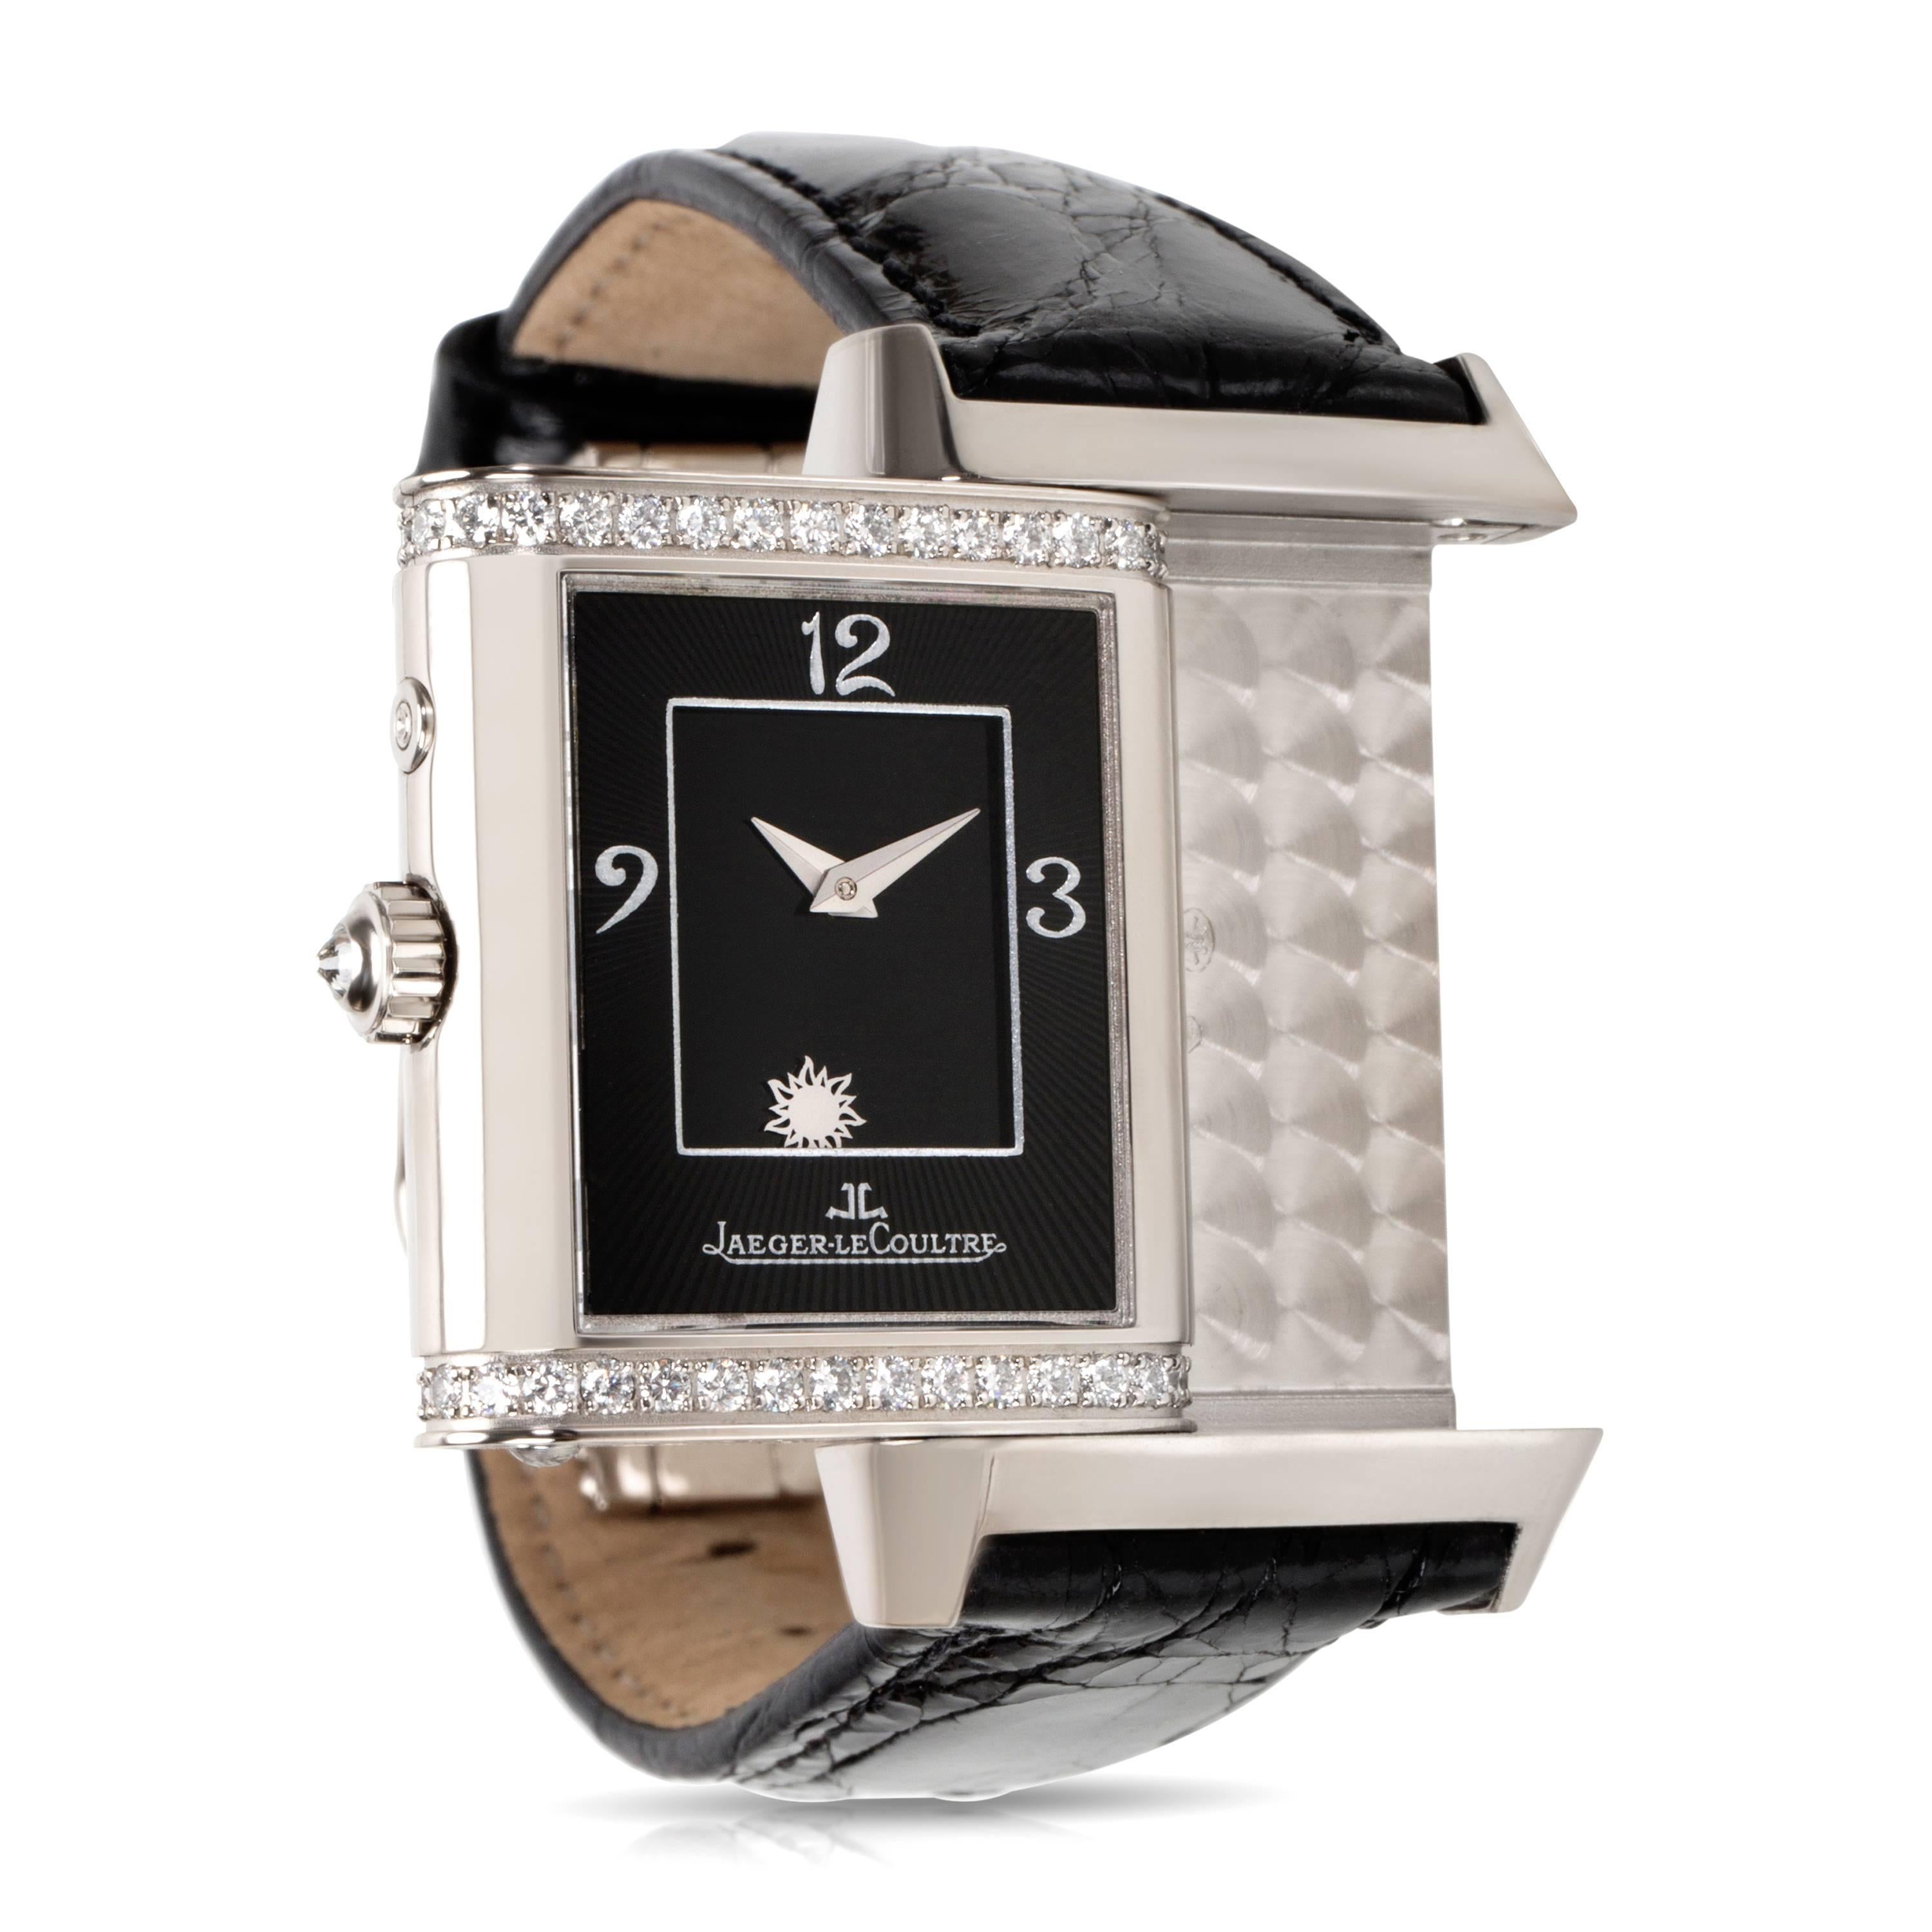 Jaeger-LeCoultre Duetto 269.3.54 Unisex Watch in White Gold

SKU: 078797

PRIMARY DETAILS
Brand:  Jaeger-LeCoultre
Model: Duetto
Serial Number: ***
Country of Origin: 
Movement Type: Mechanical: Hand-winding
Refurbished Notes: Overhaul, Refinish,